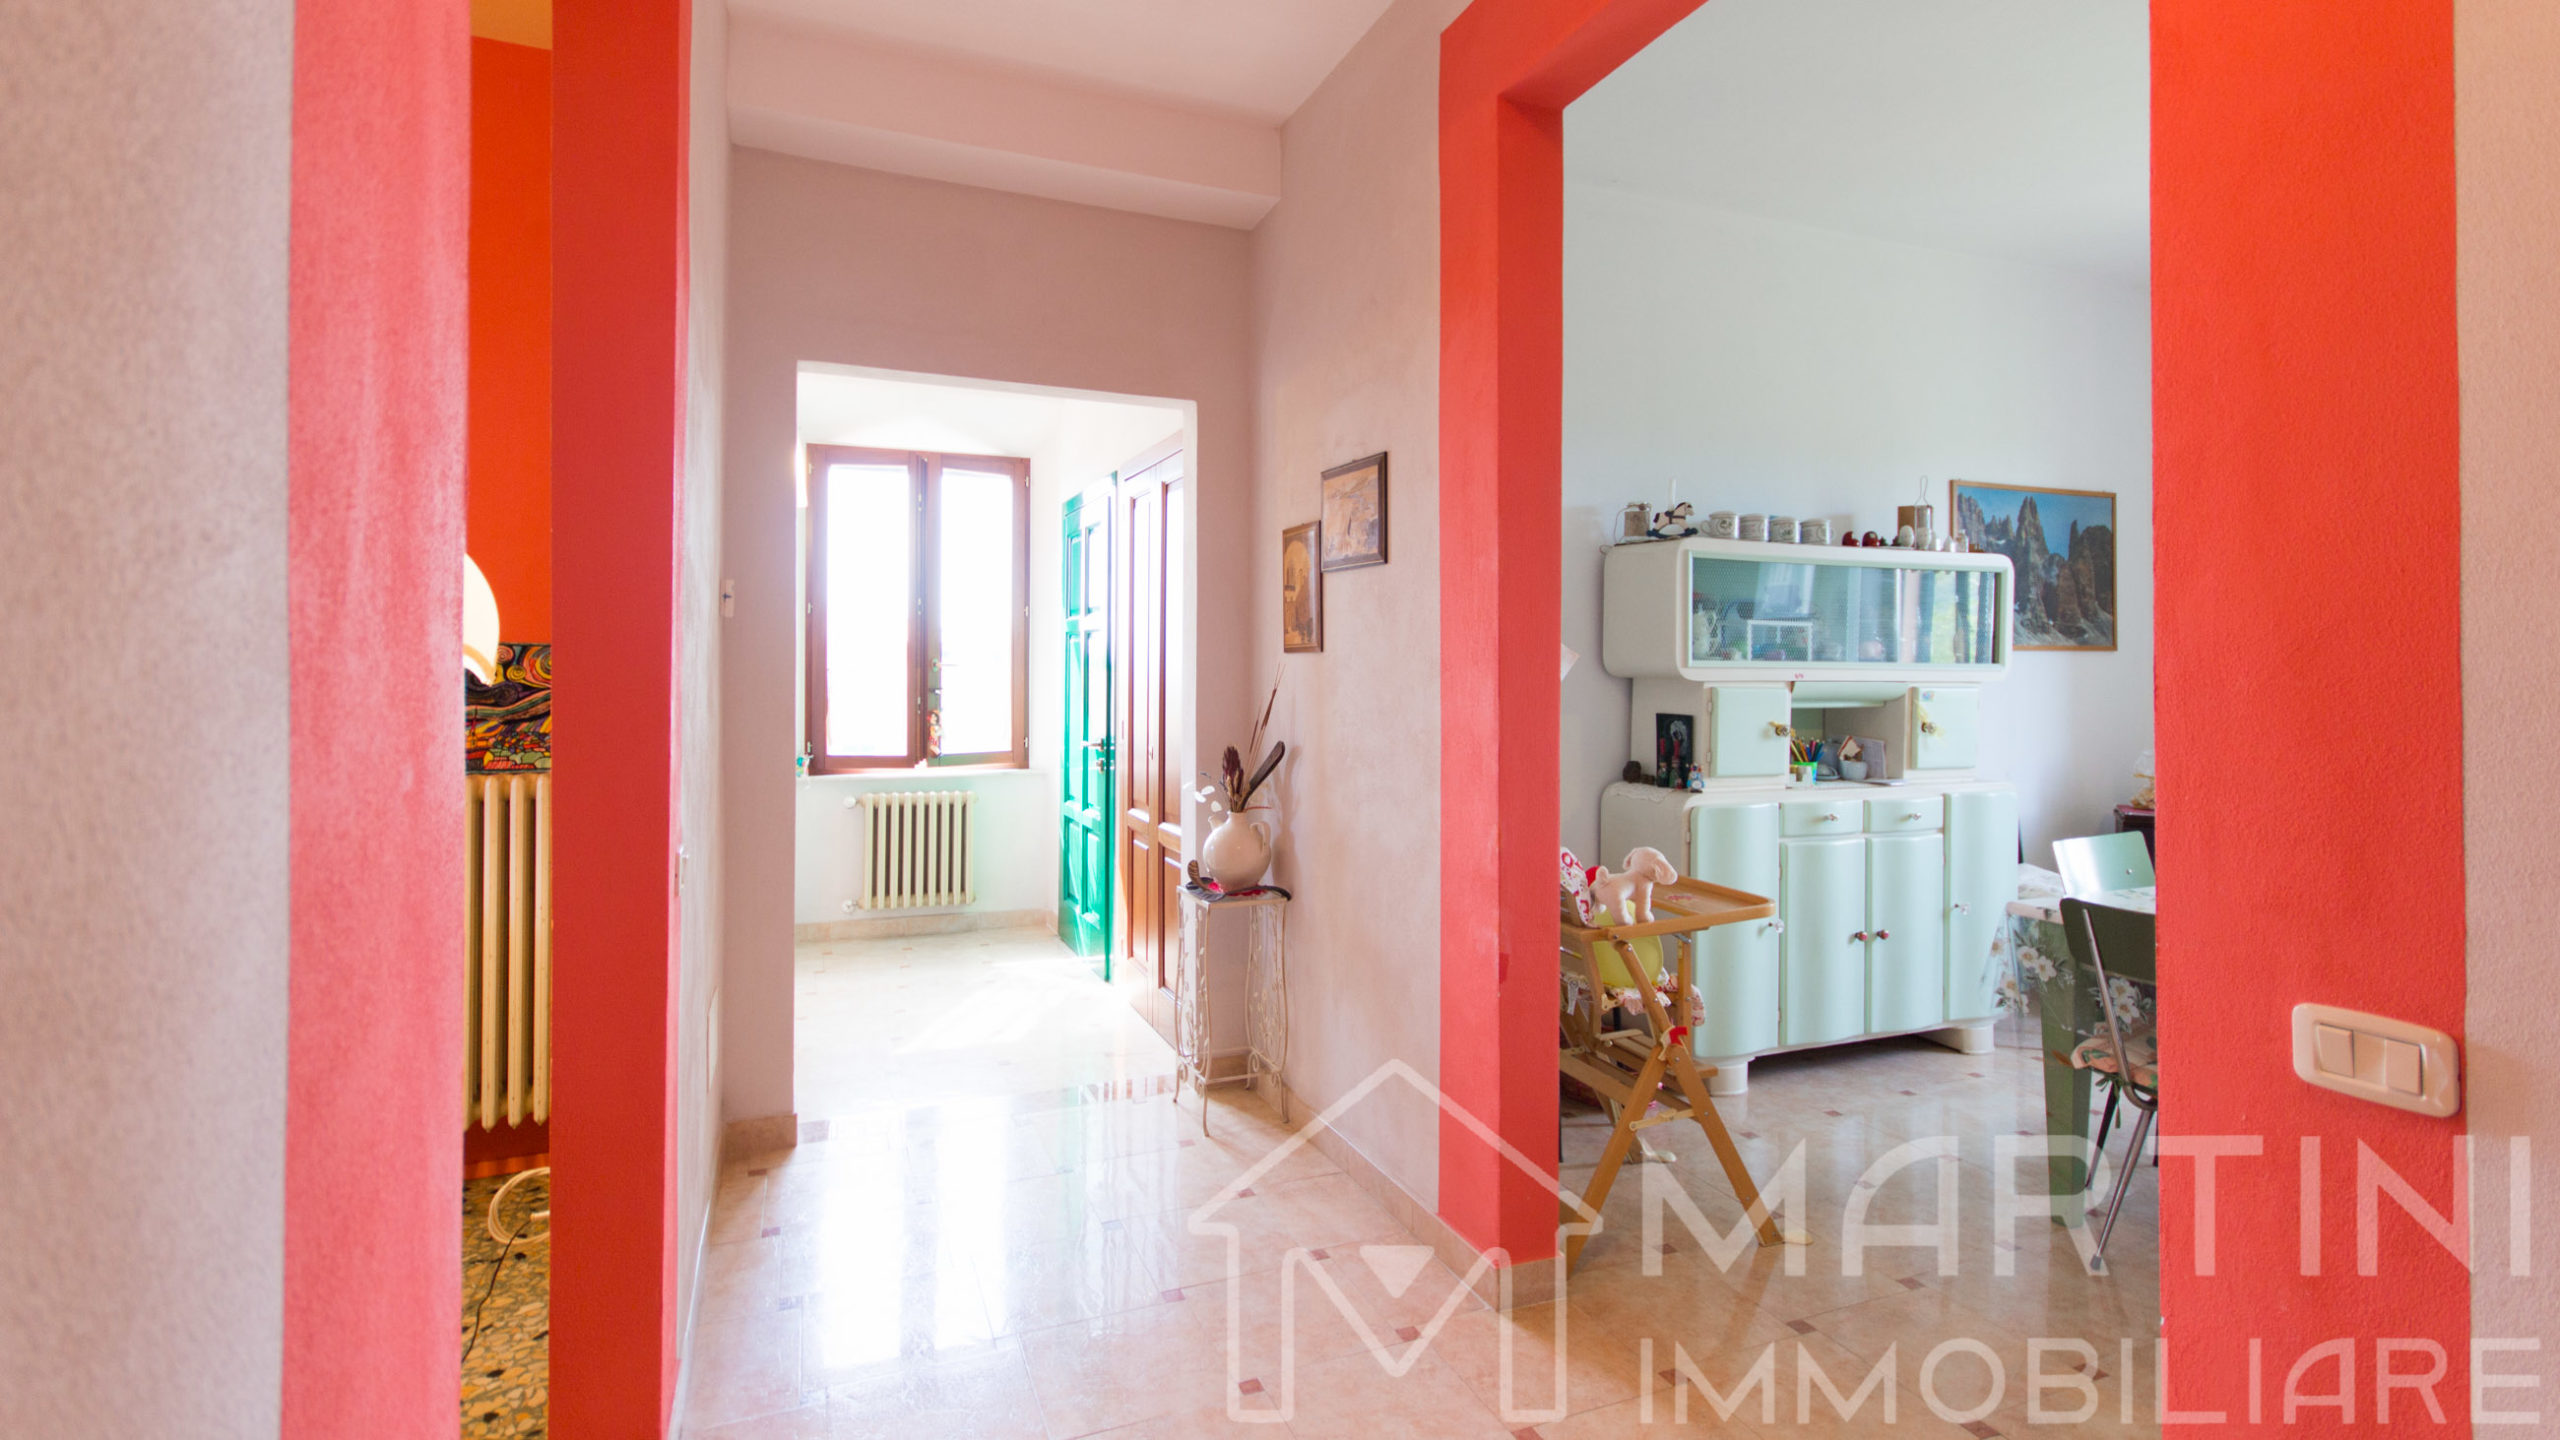 Renovated Apartment For Sale with Terrace and View